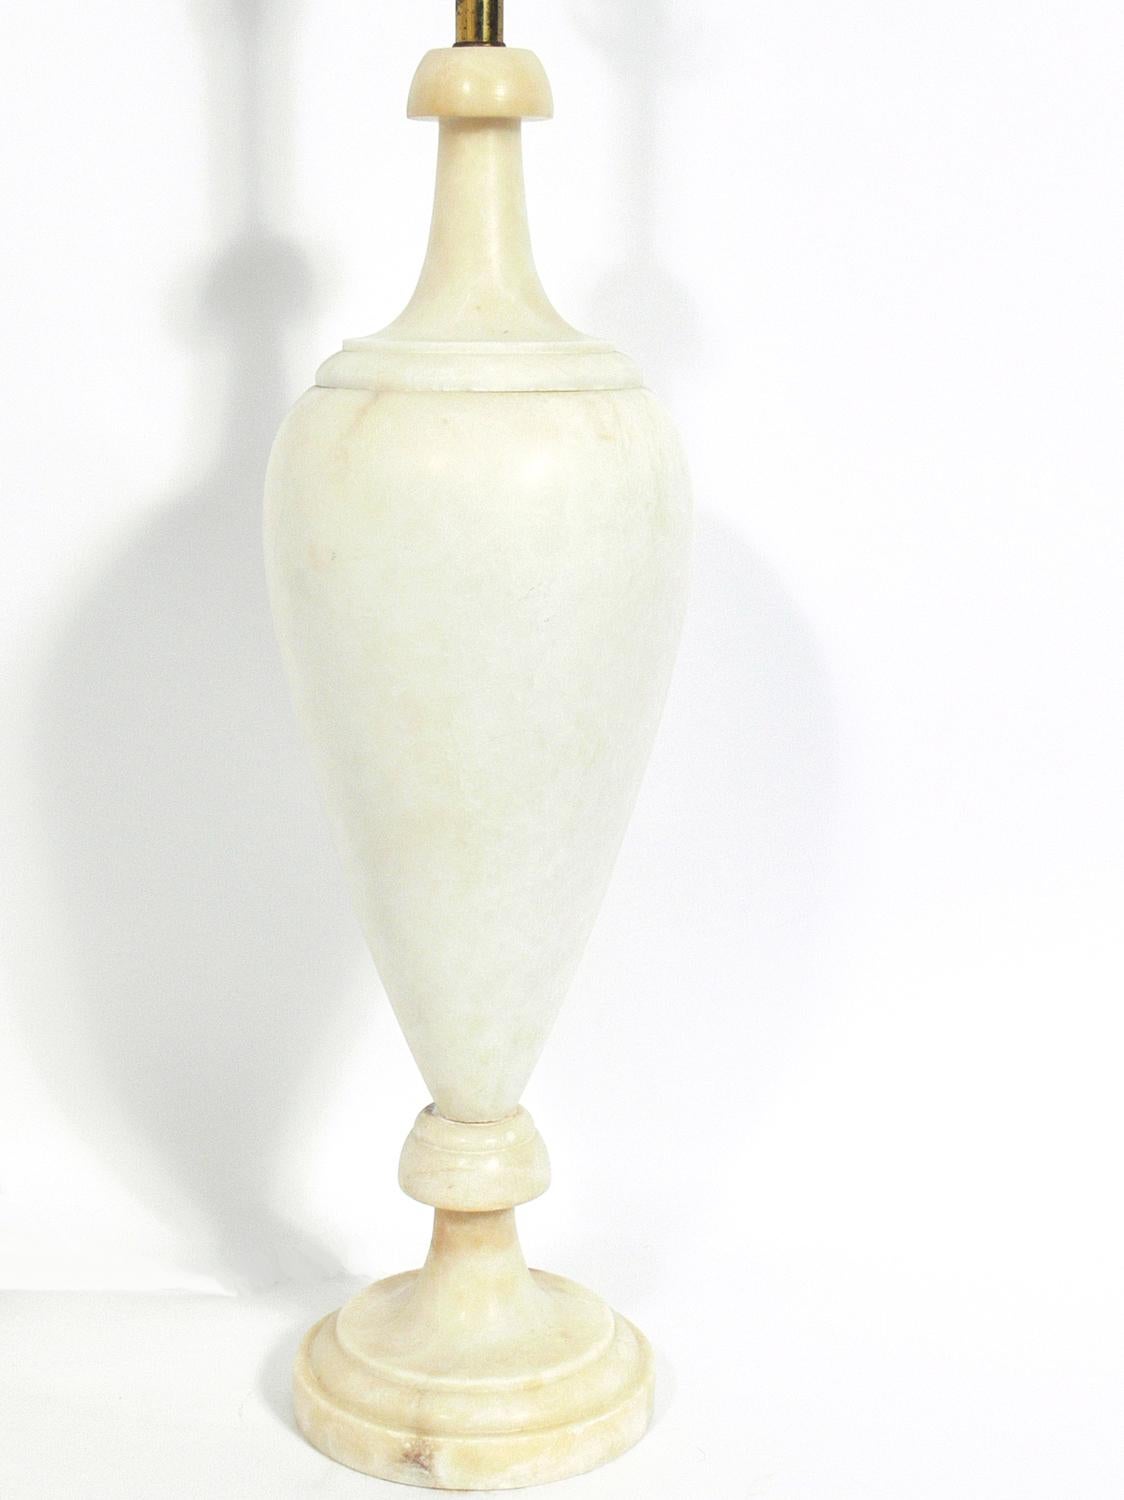 Elegant large-scale Alabaster lamp, probably Italian, circa 1950s. It has been rewired and is ready to use. The price noted below includes the shade.